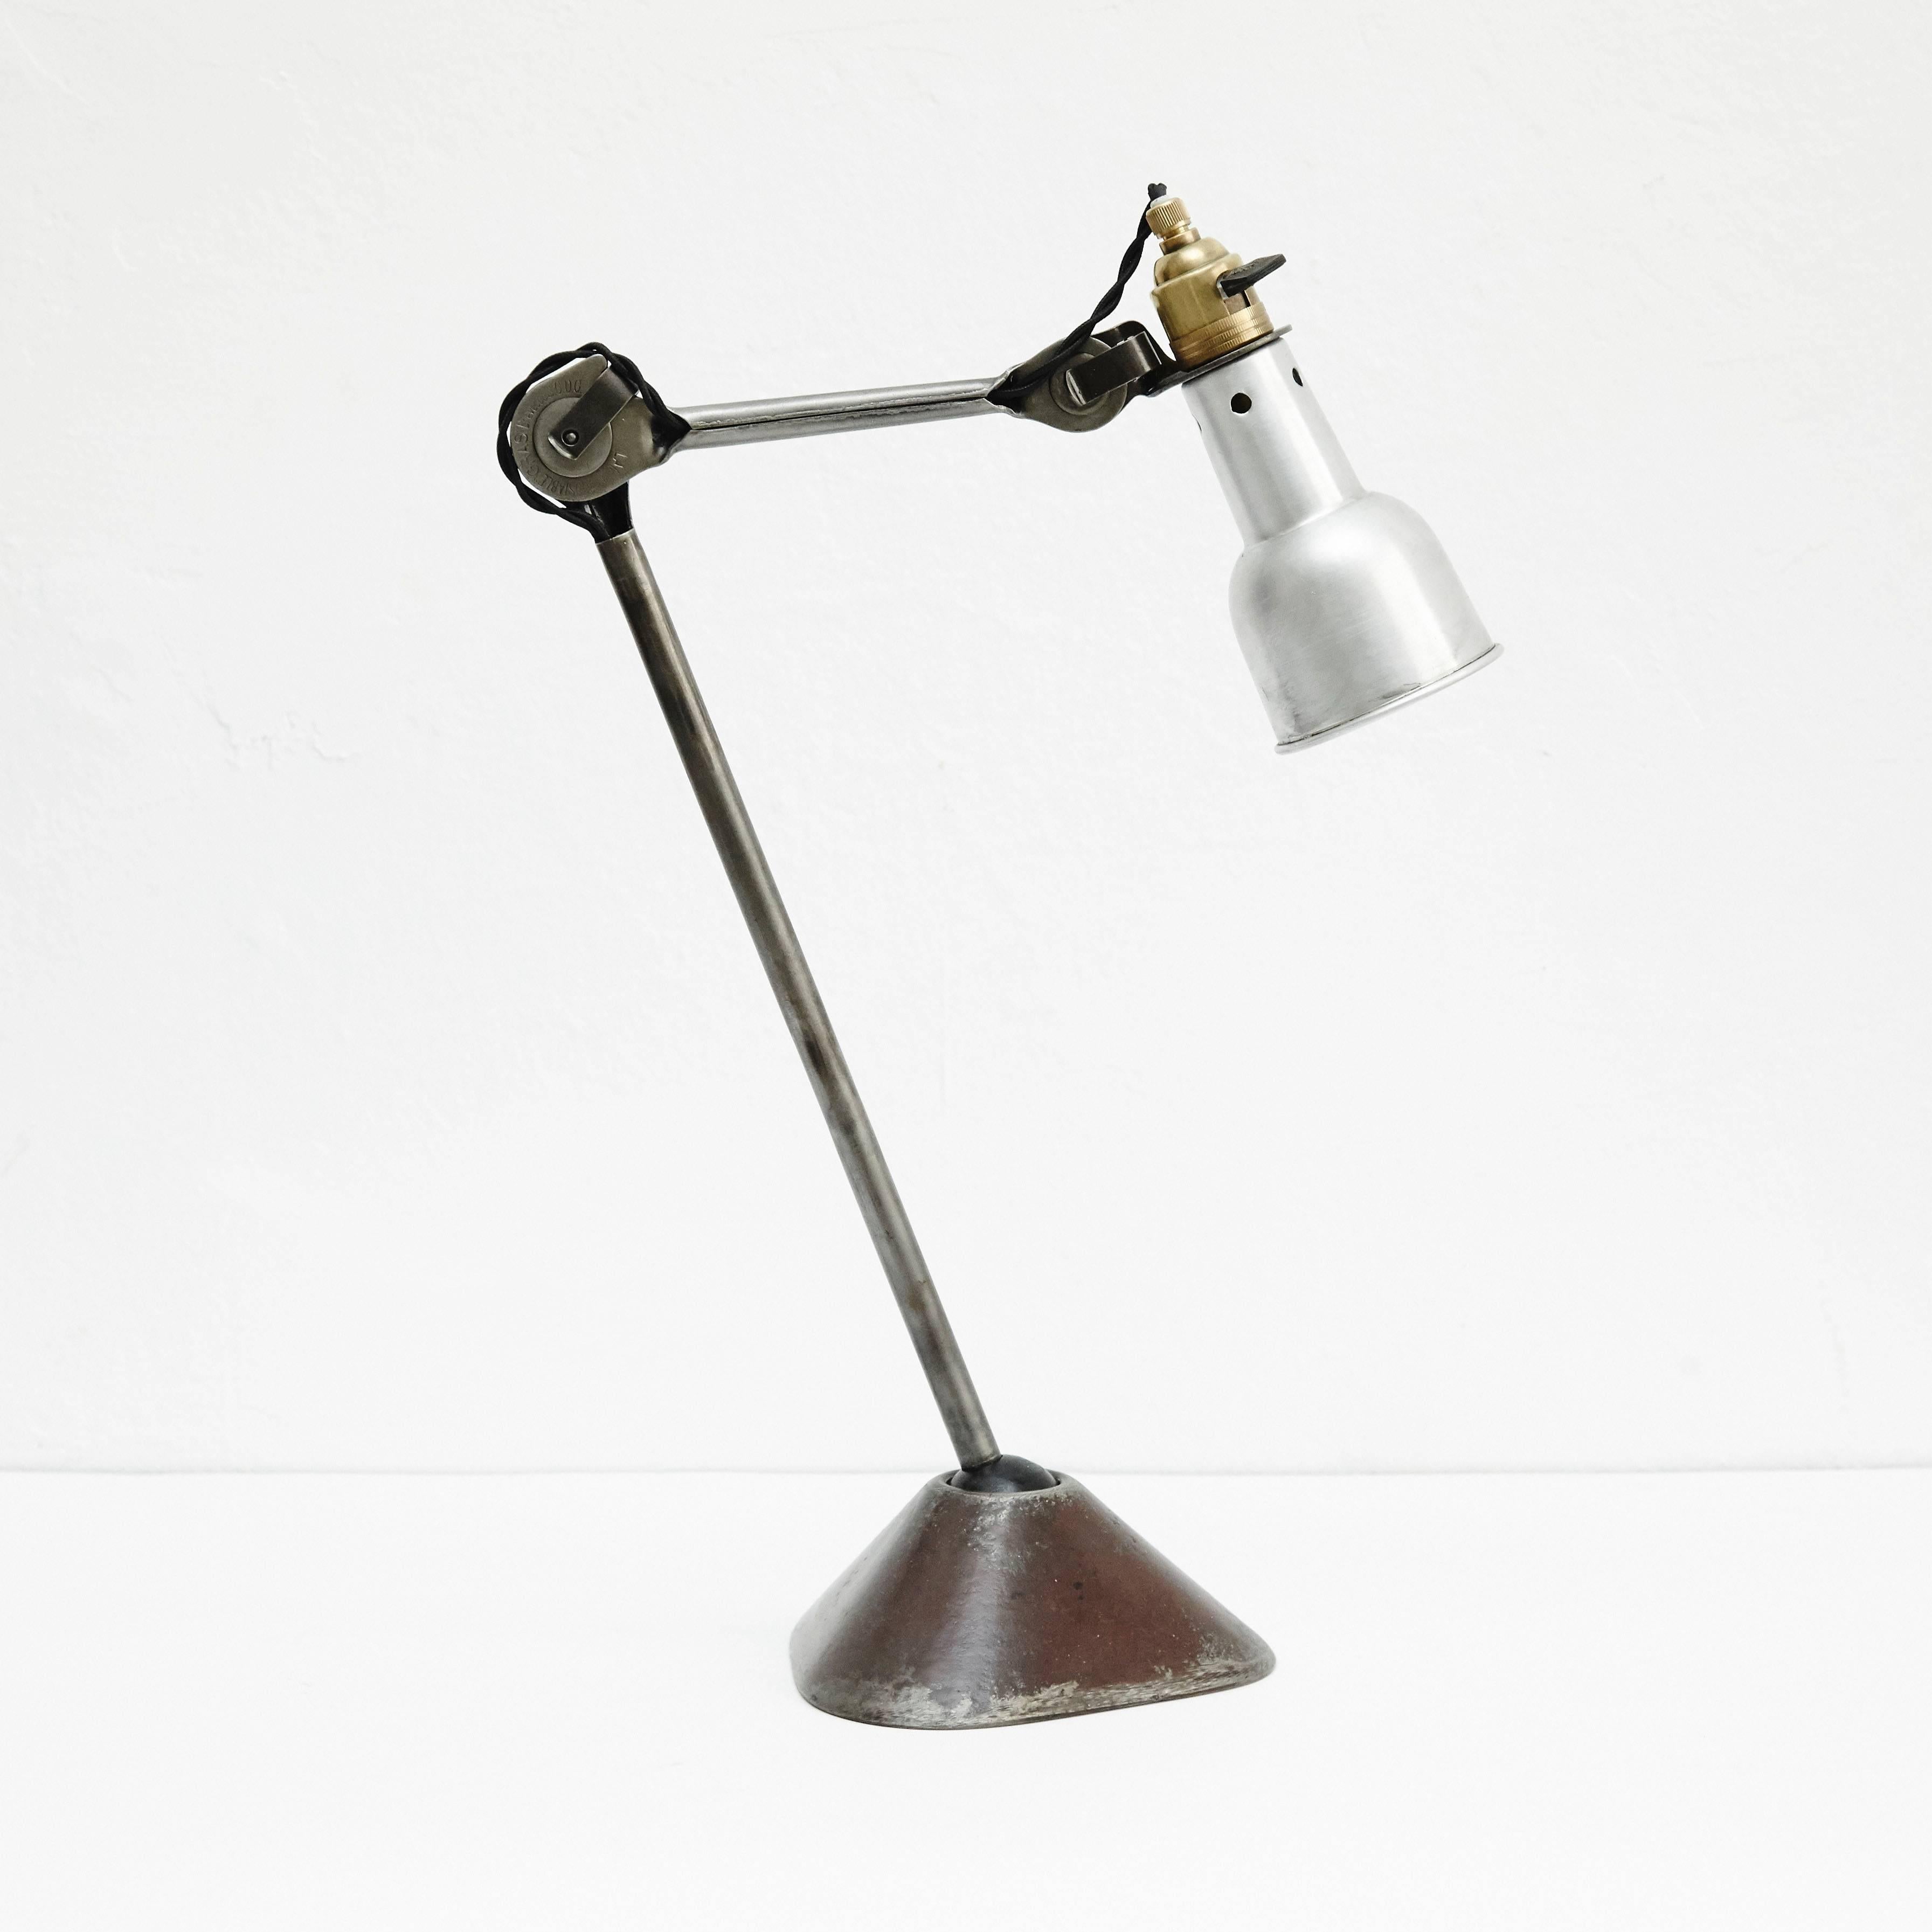 Table lamp designed by Bernard-Albin Gras with oculist shade.
Manufactured by Gras (France) circa 1930.
Aluminium and steel.

In good condition, with minor wear consistent with age and use, preserving a beautiful patina.

In 1922 Bernard-Albin